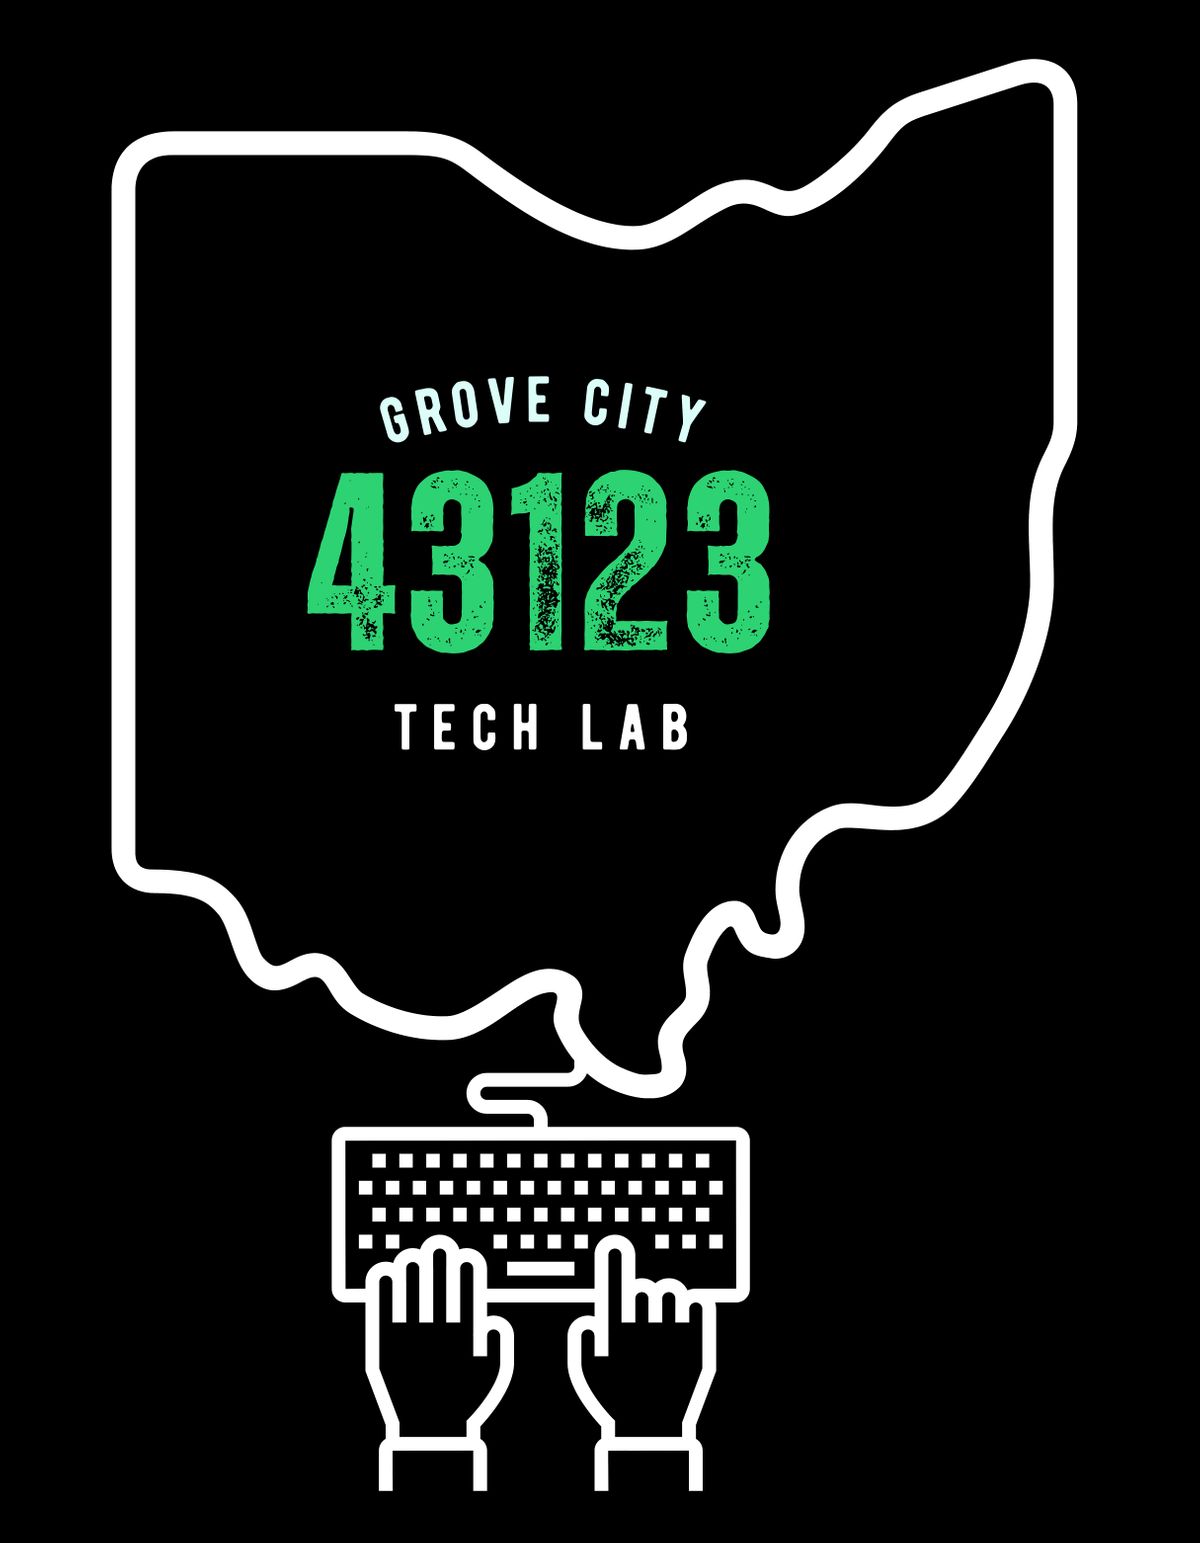 Grove City Tech Lab Office Hours